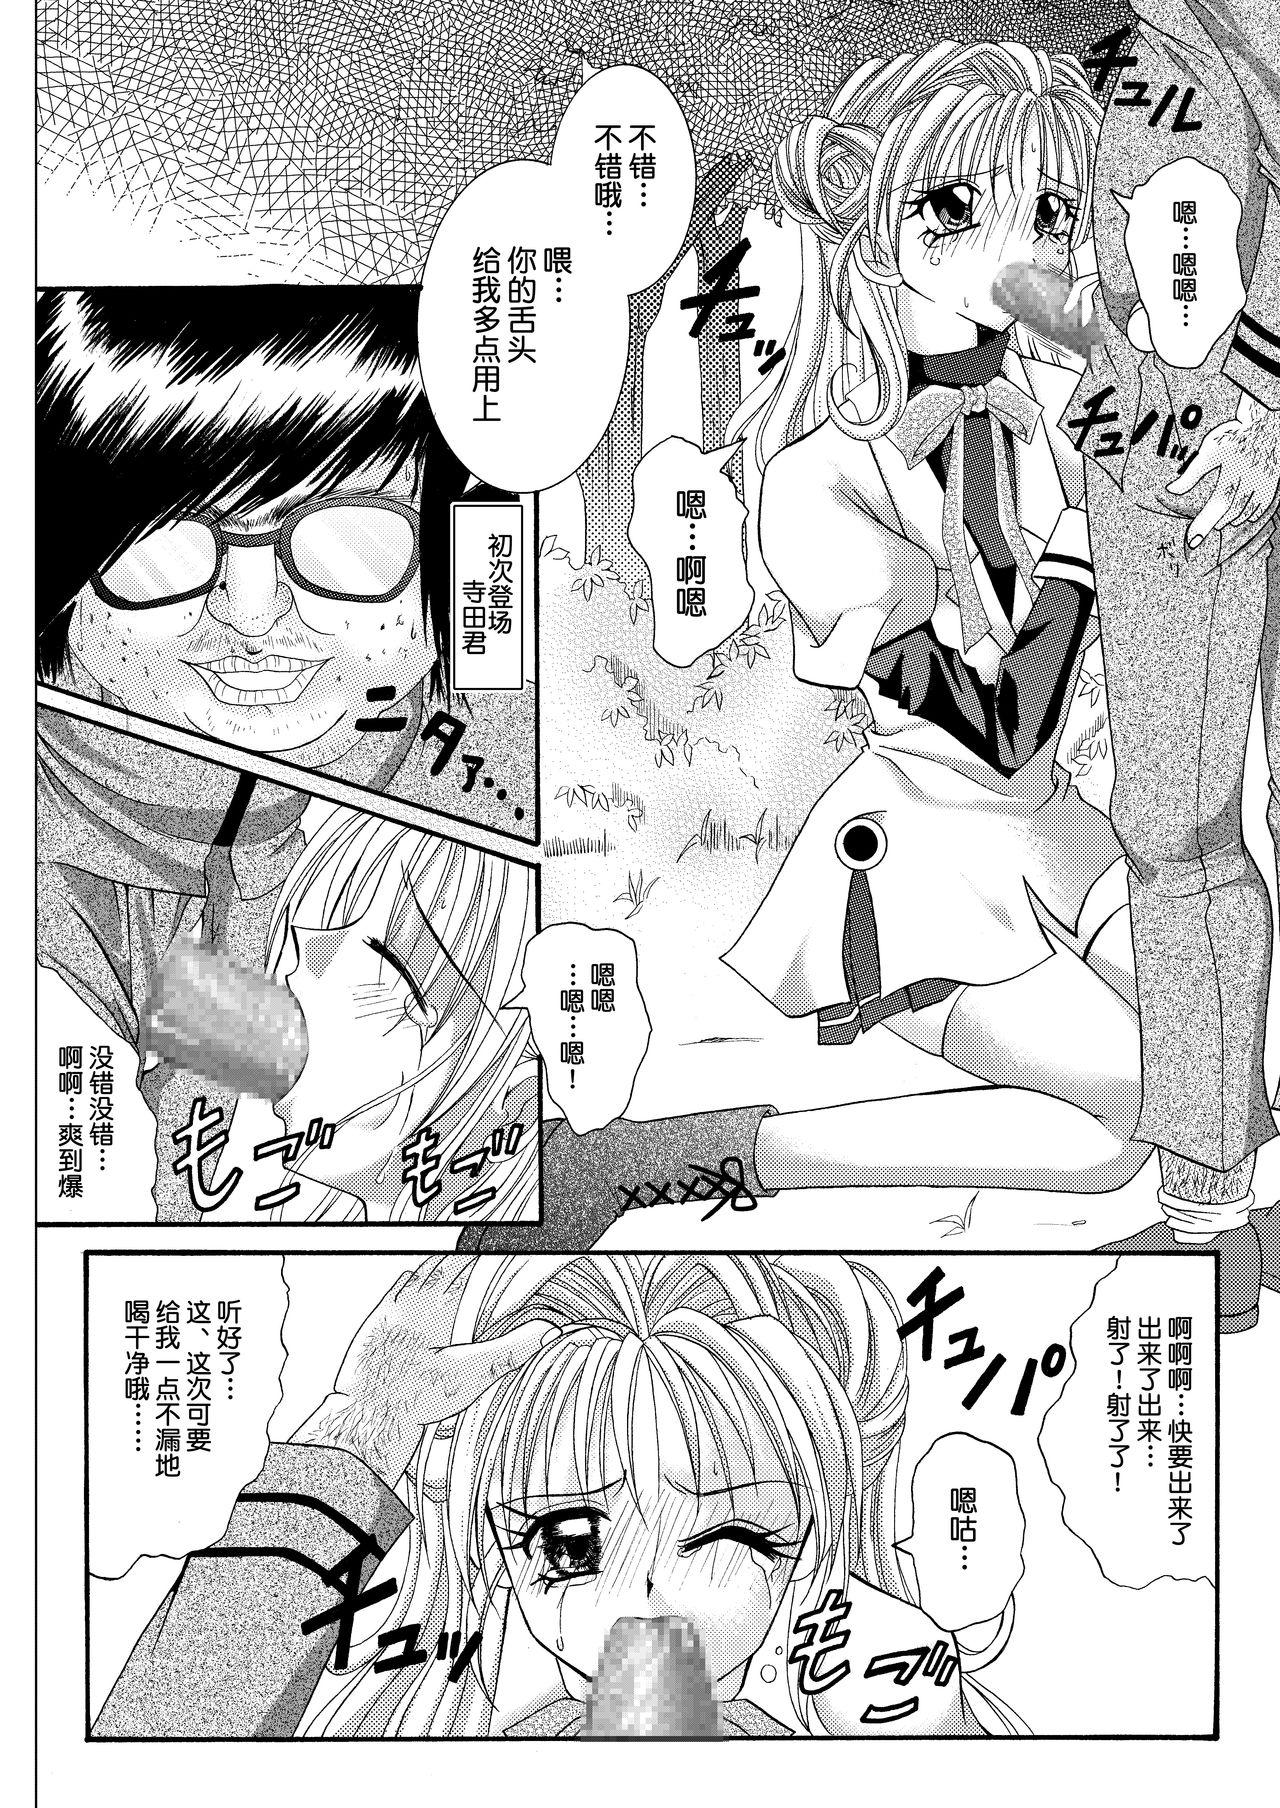 Nena Rogue Spear 208 Download edition - Kamikaze kaitou jeanne Young - Page 6